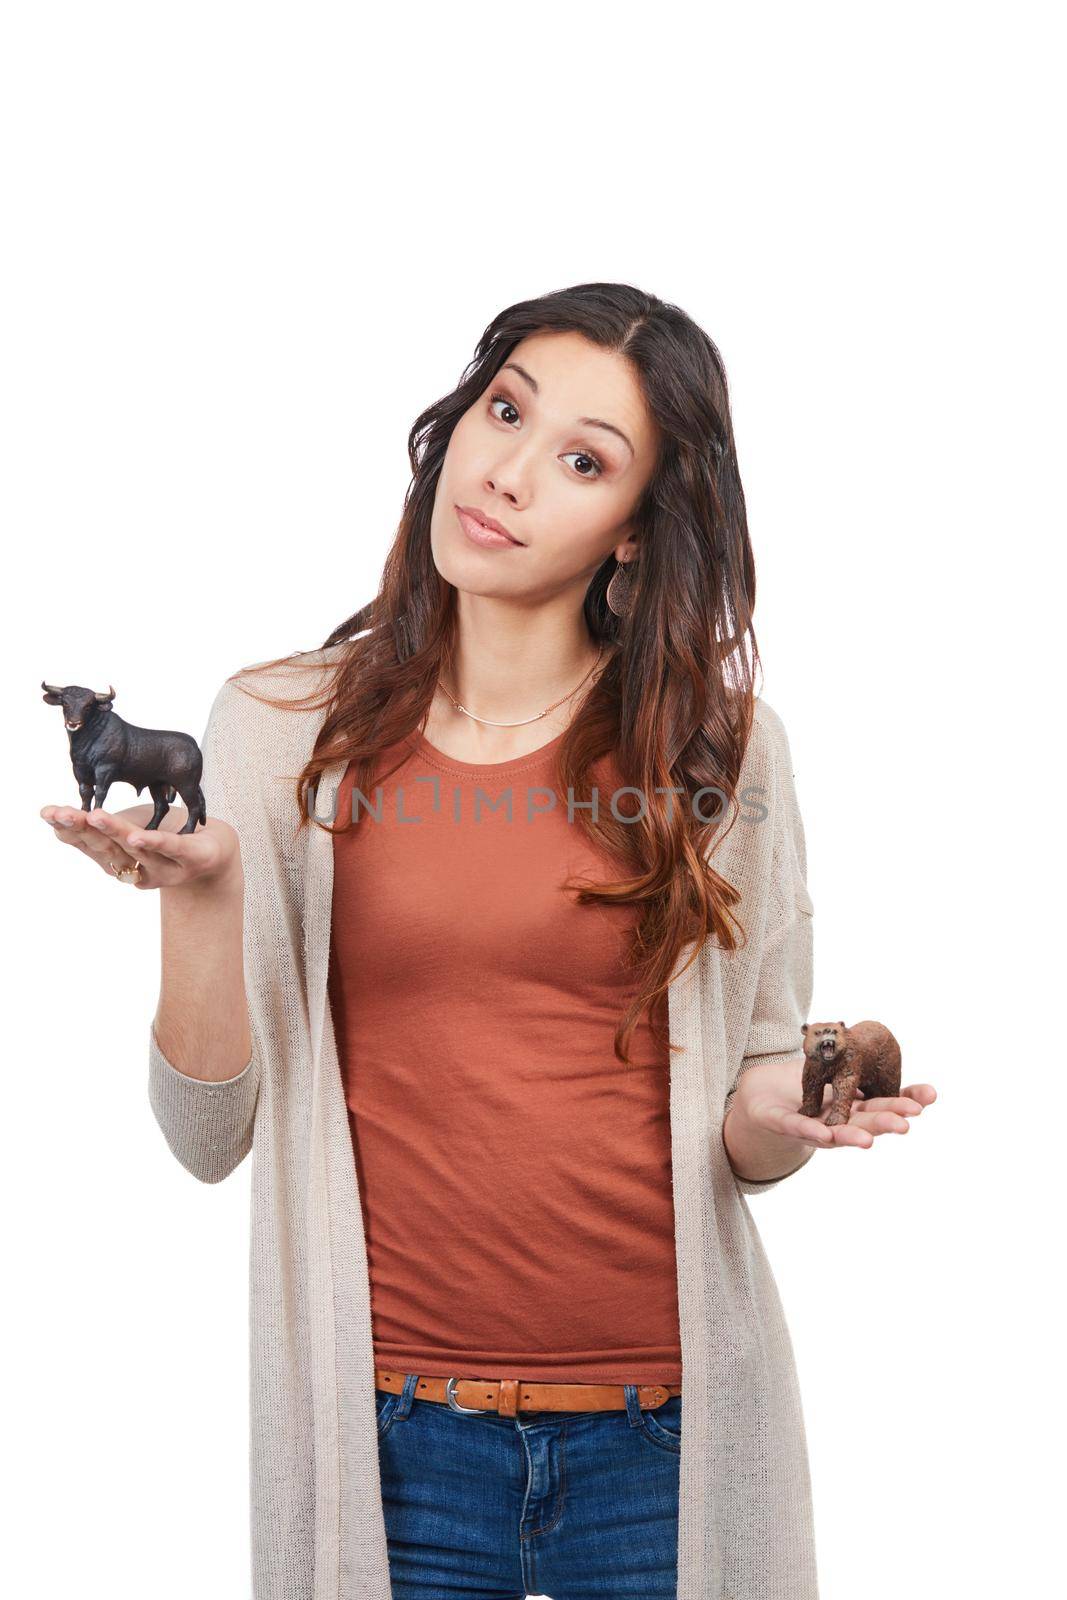 Weve all got a little animal in us. Portrait of a confident young woman holding up two toy animals in studio. by YuriArcurs